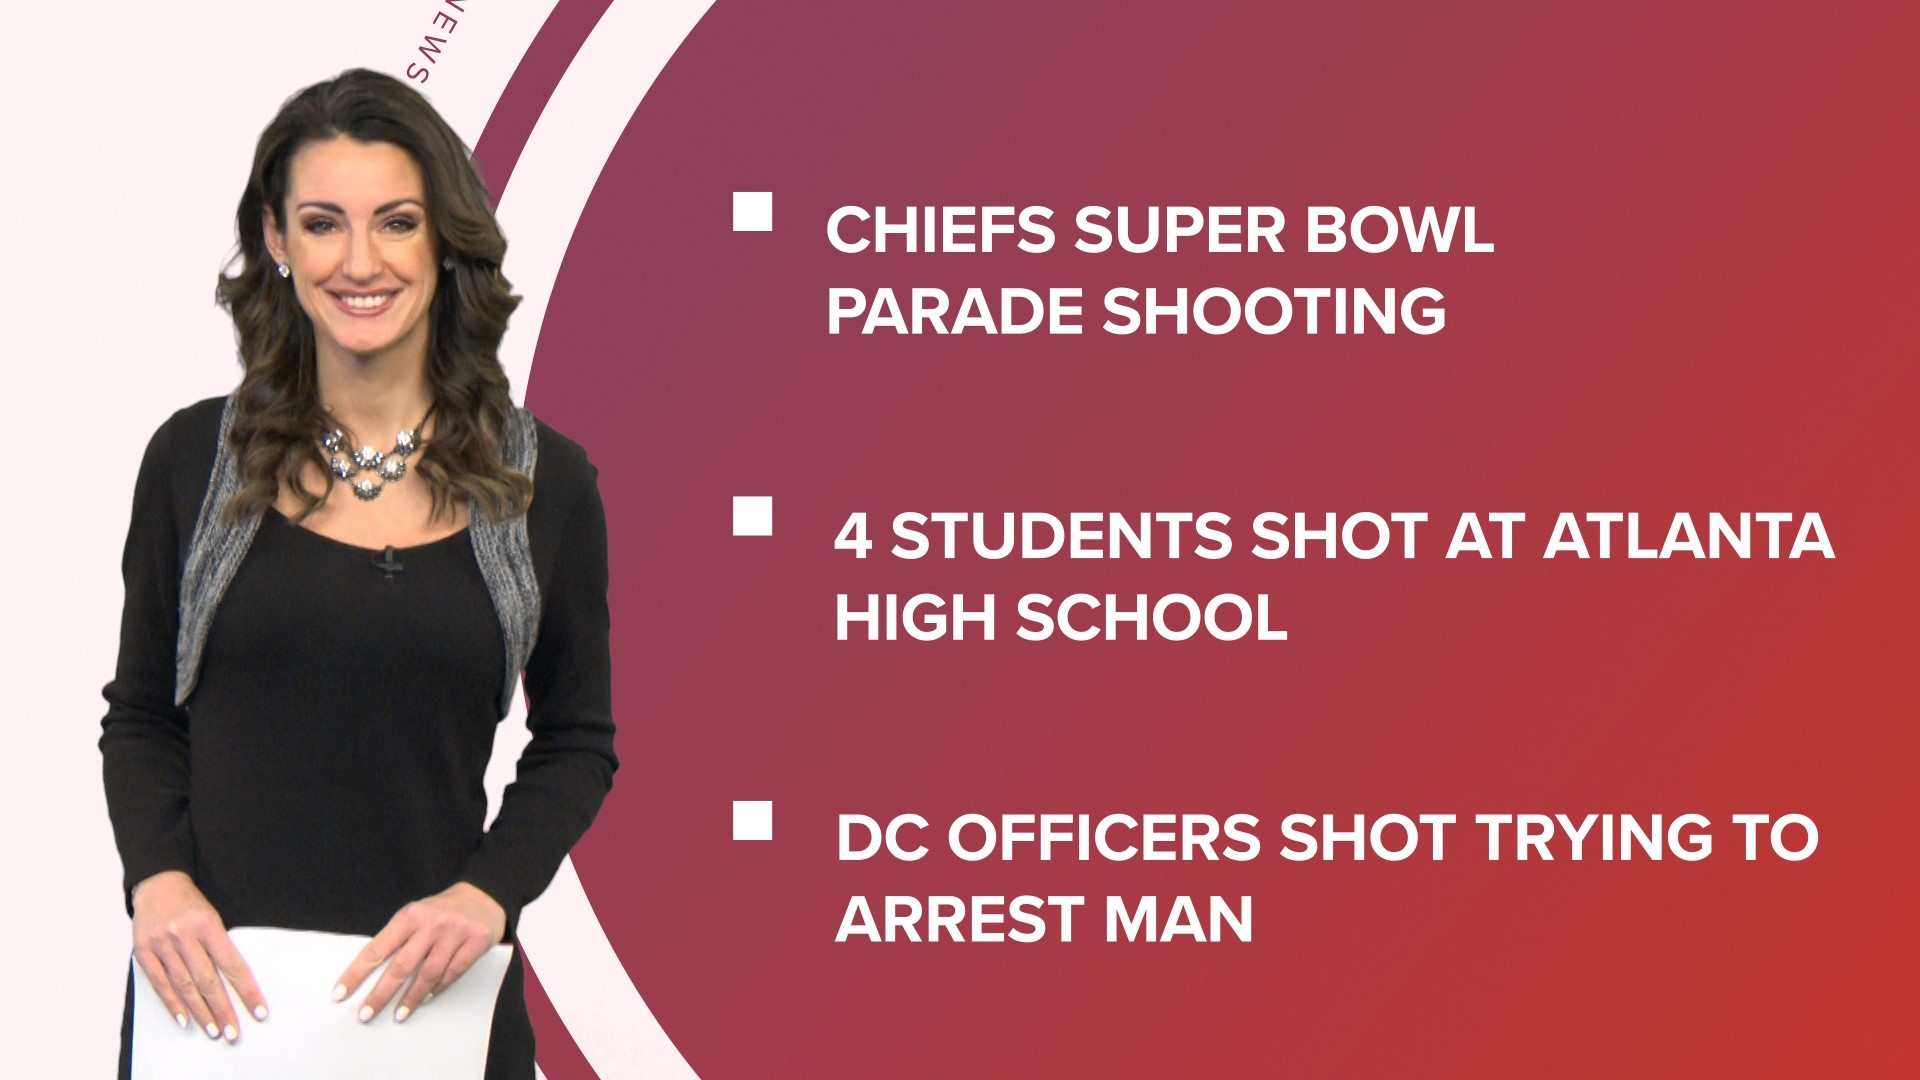 A look at what is happening in the news from the shooting at the Kansas City Chiefs Super Bowl parade to Marvel revealing the new cast of 'Fantastic Four.'